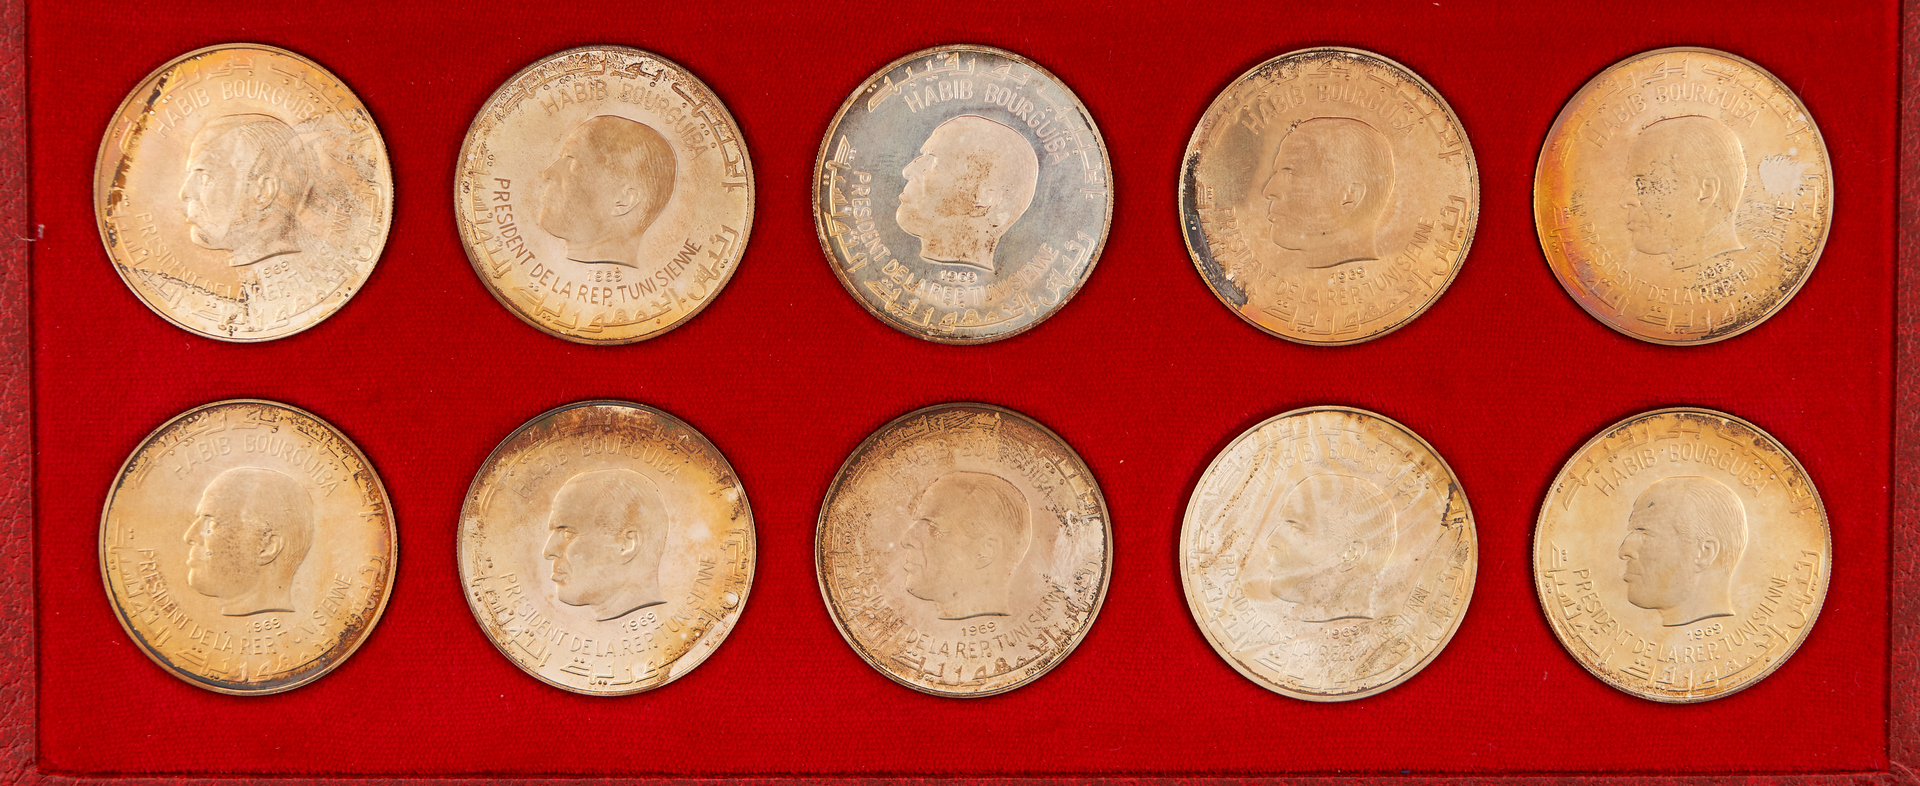 Lot 725: 5 Proof Sets, incl. .999 Silver, .900 Gold